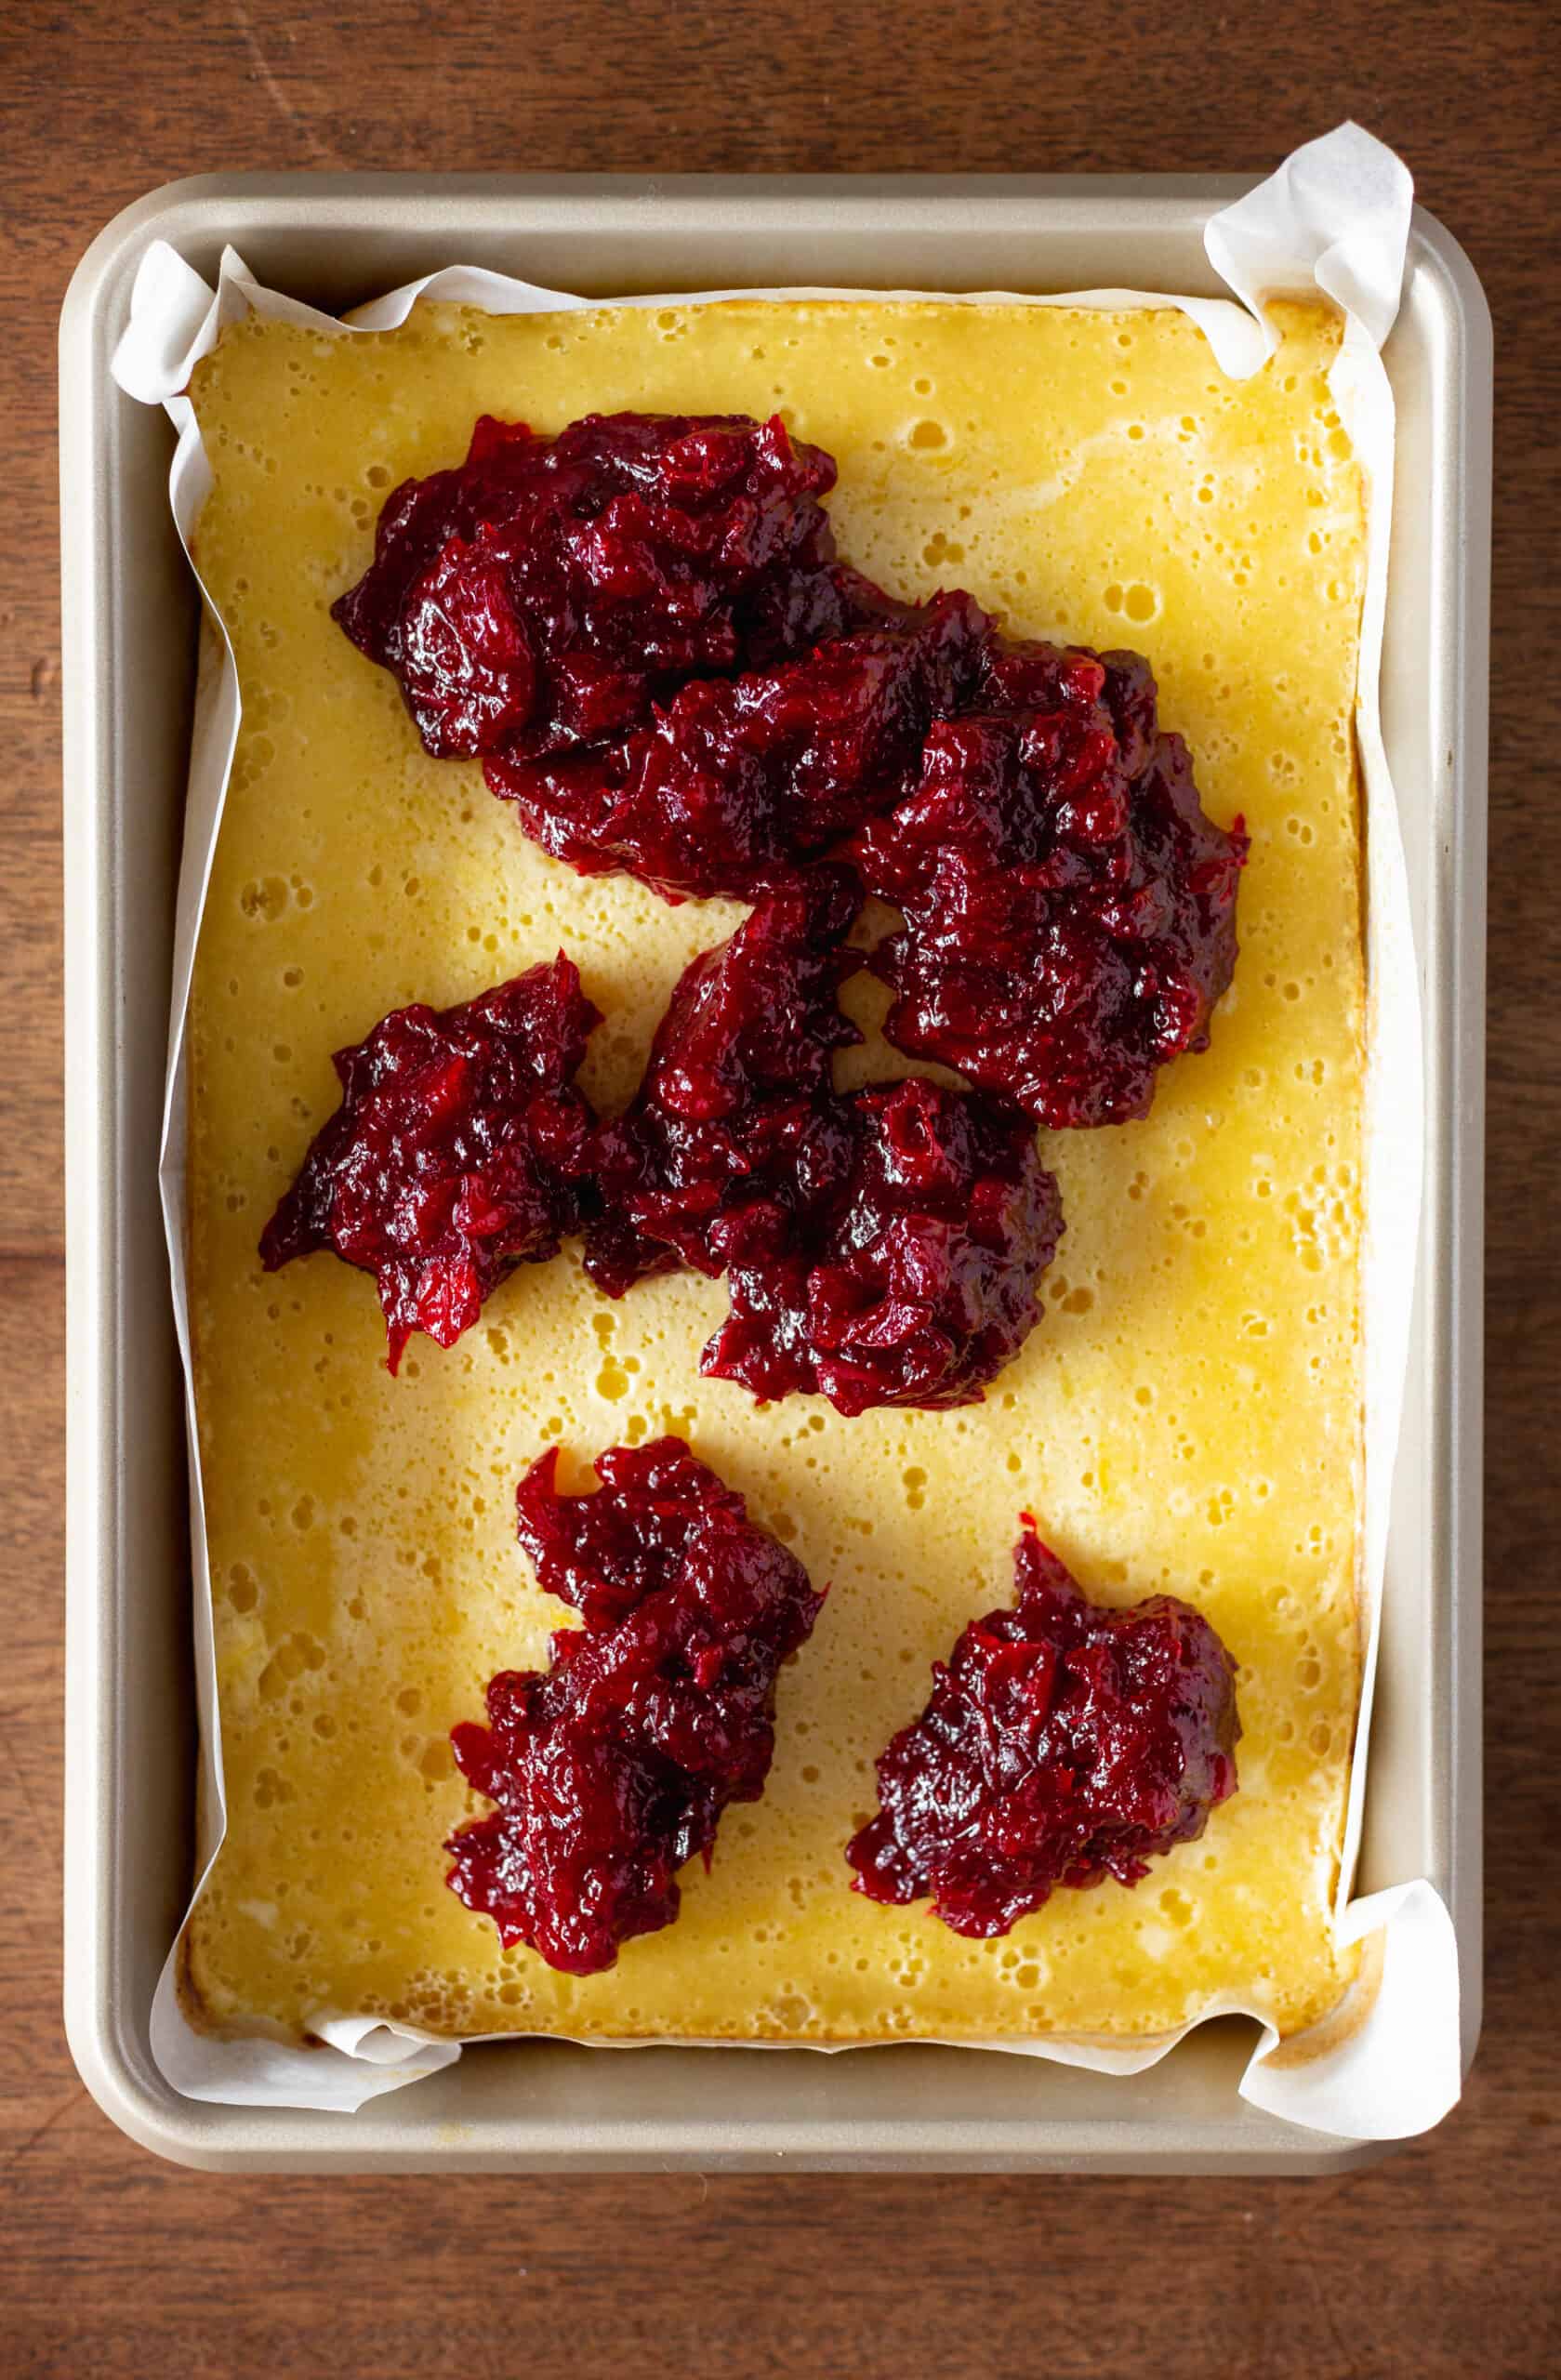 Scoops of cranberry placed on lemon bars